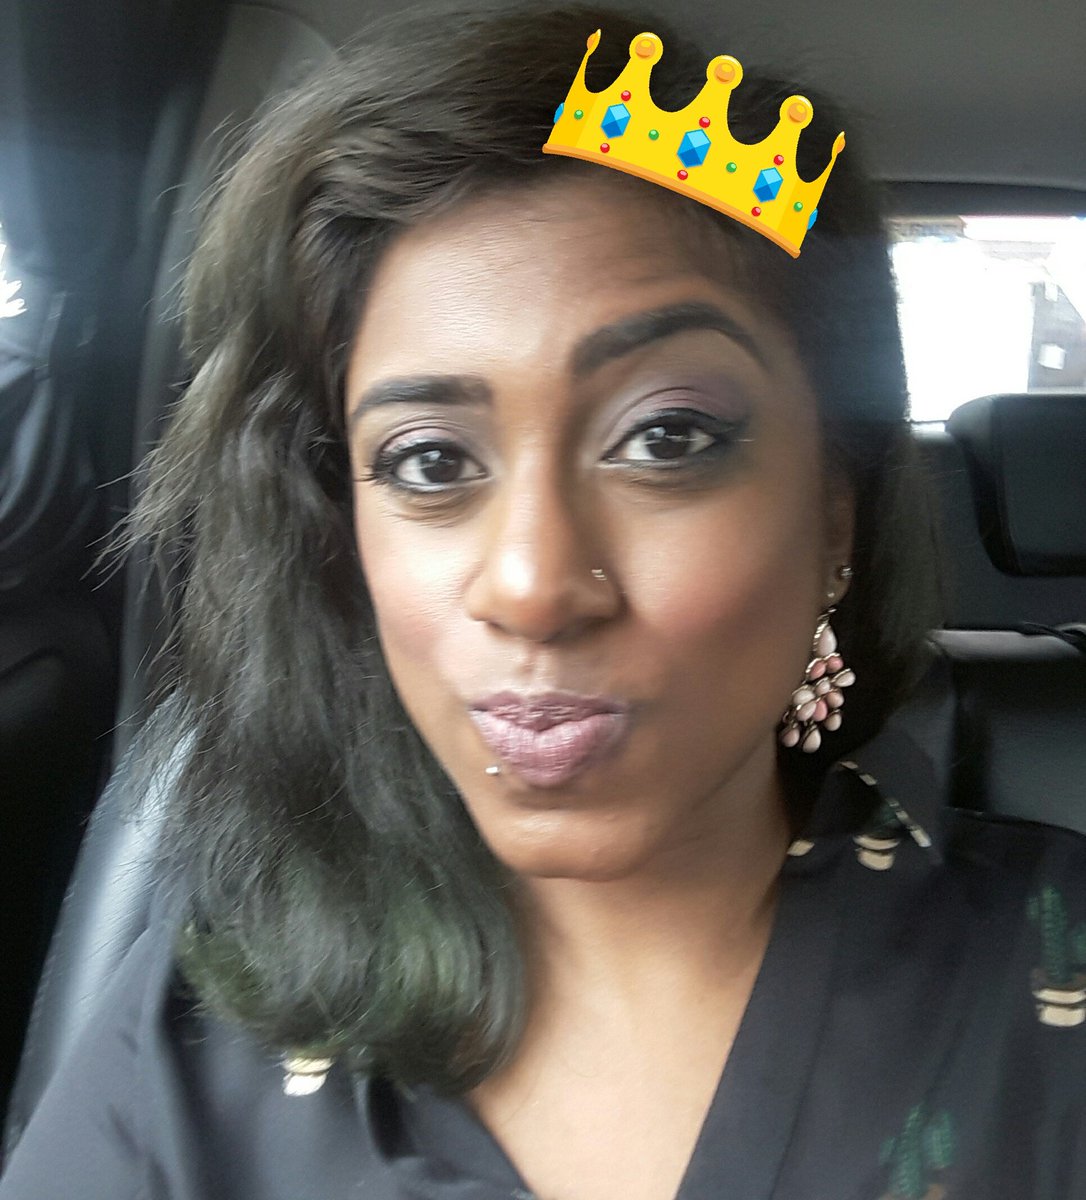 Le BF calls me Uberqueen. 
It's 100% and fit for the... 😉